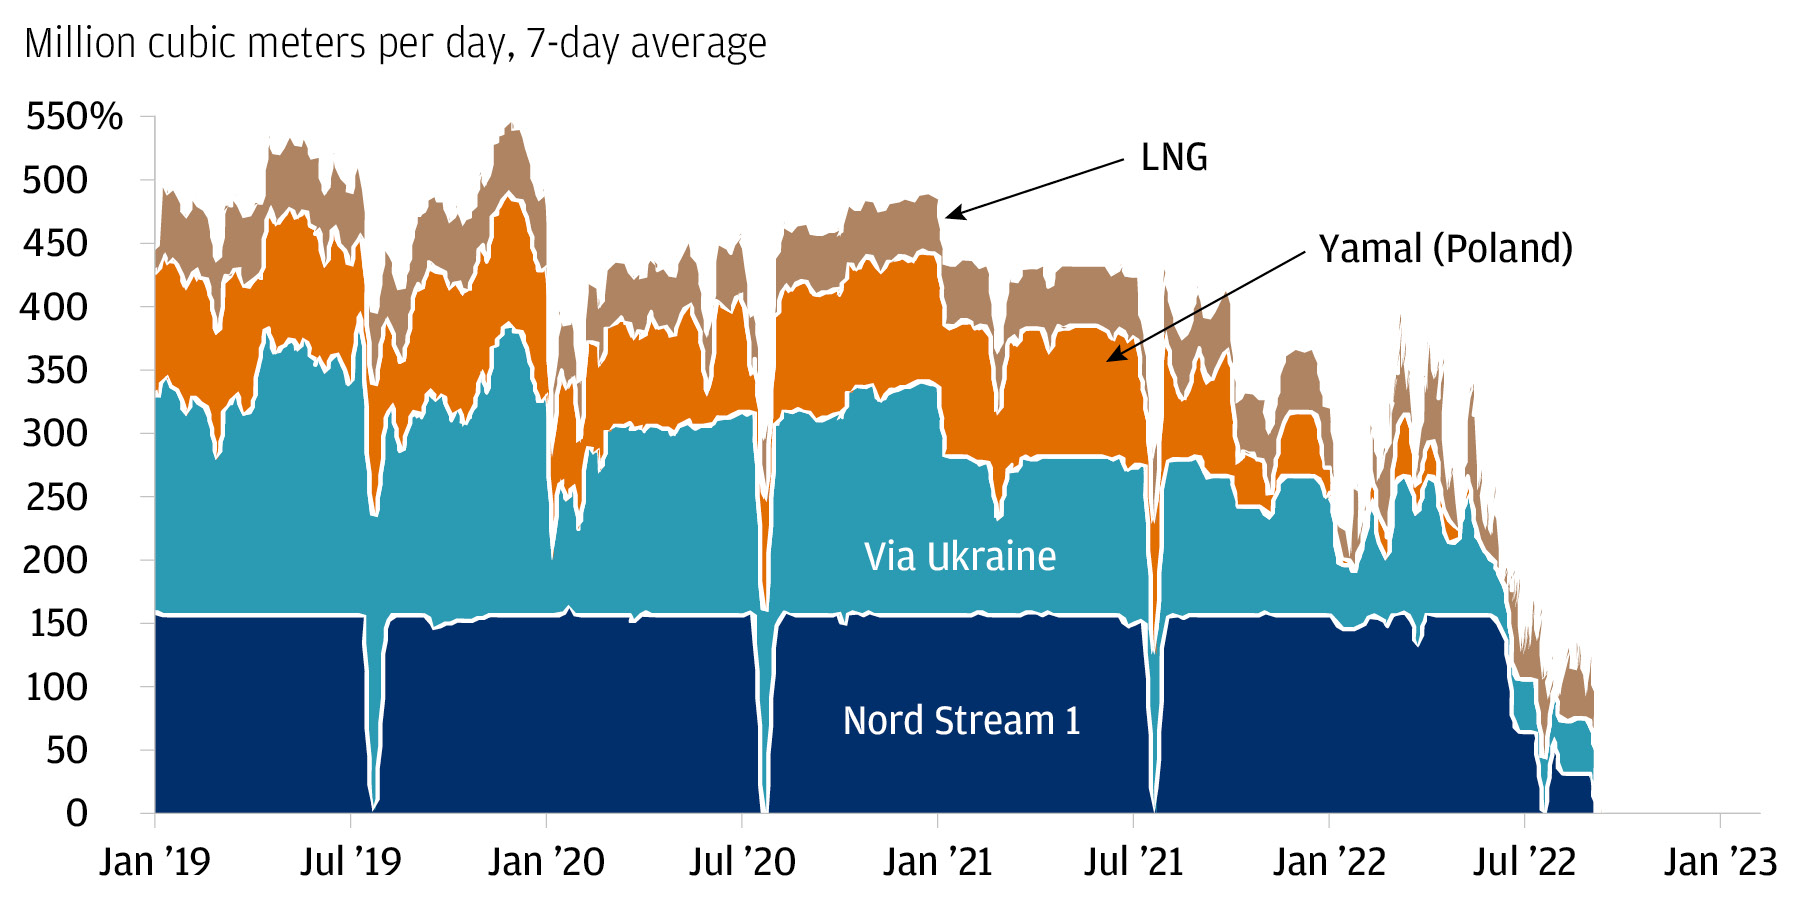 Russian natural gas exports to Europe plummeting